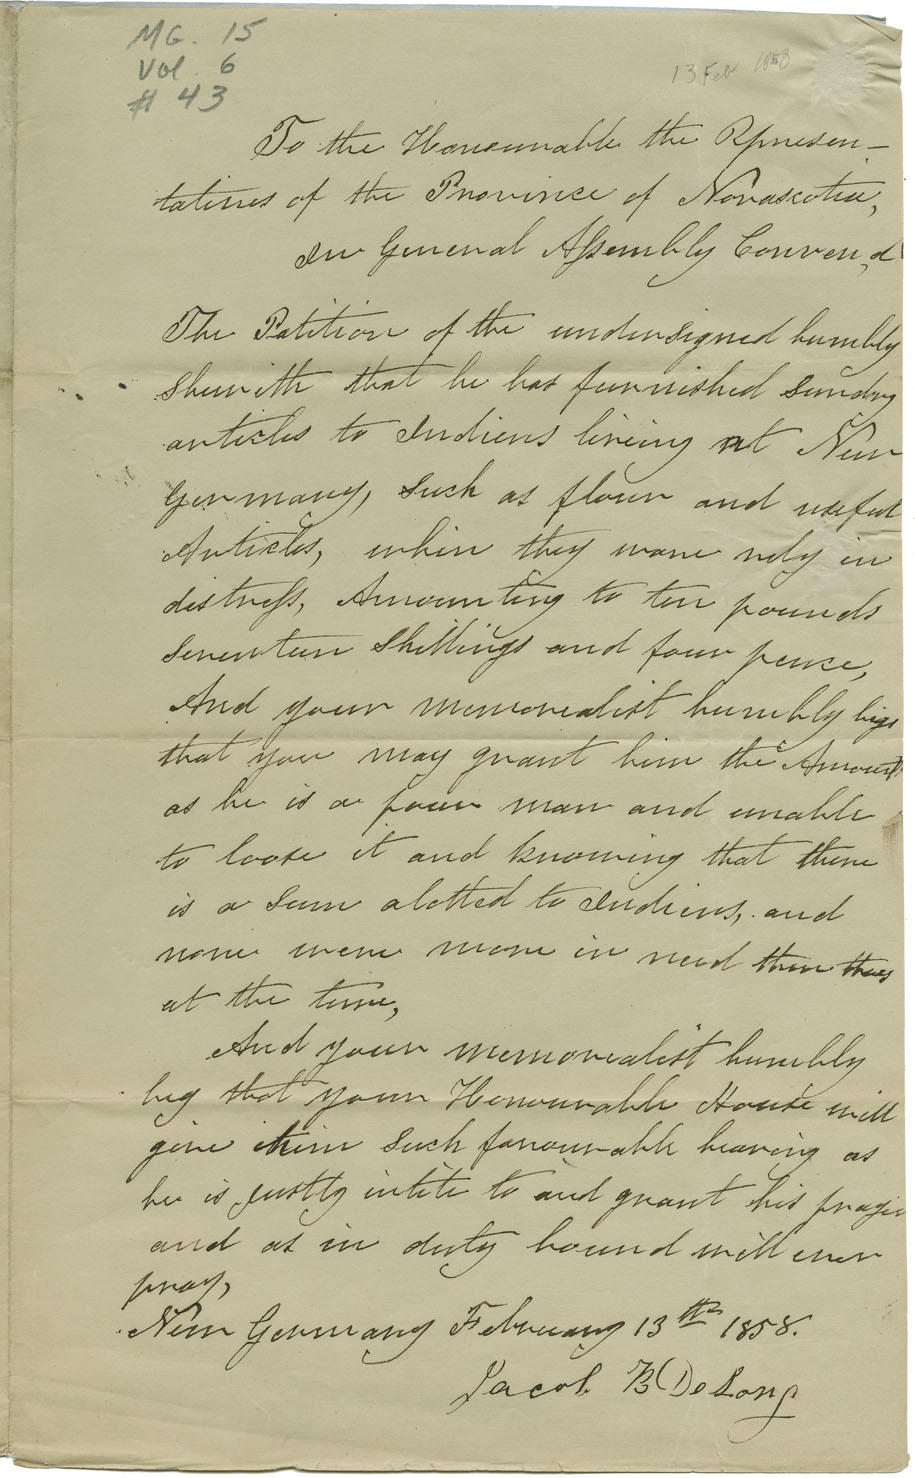 Petition of Jacob B. DeLong of New Germany for money for services to Mi'kmaq.